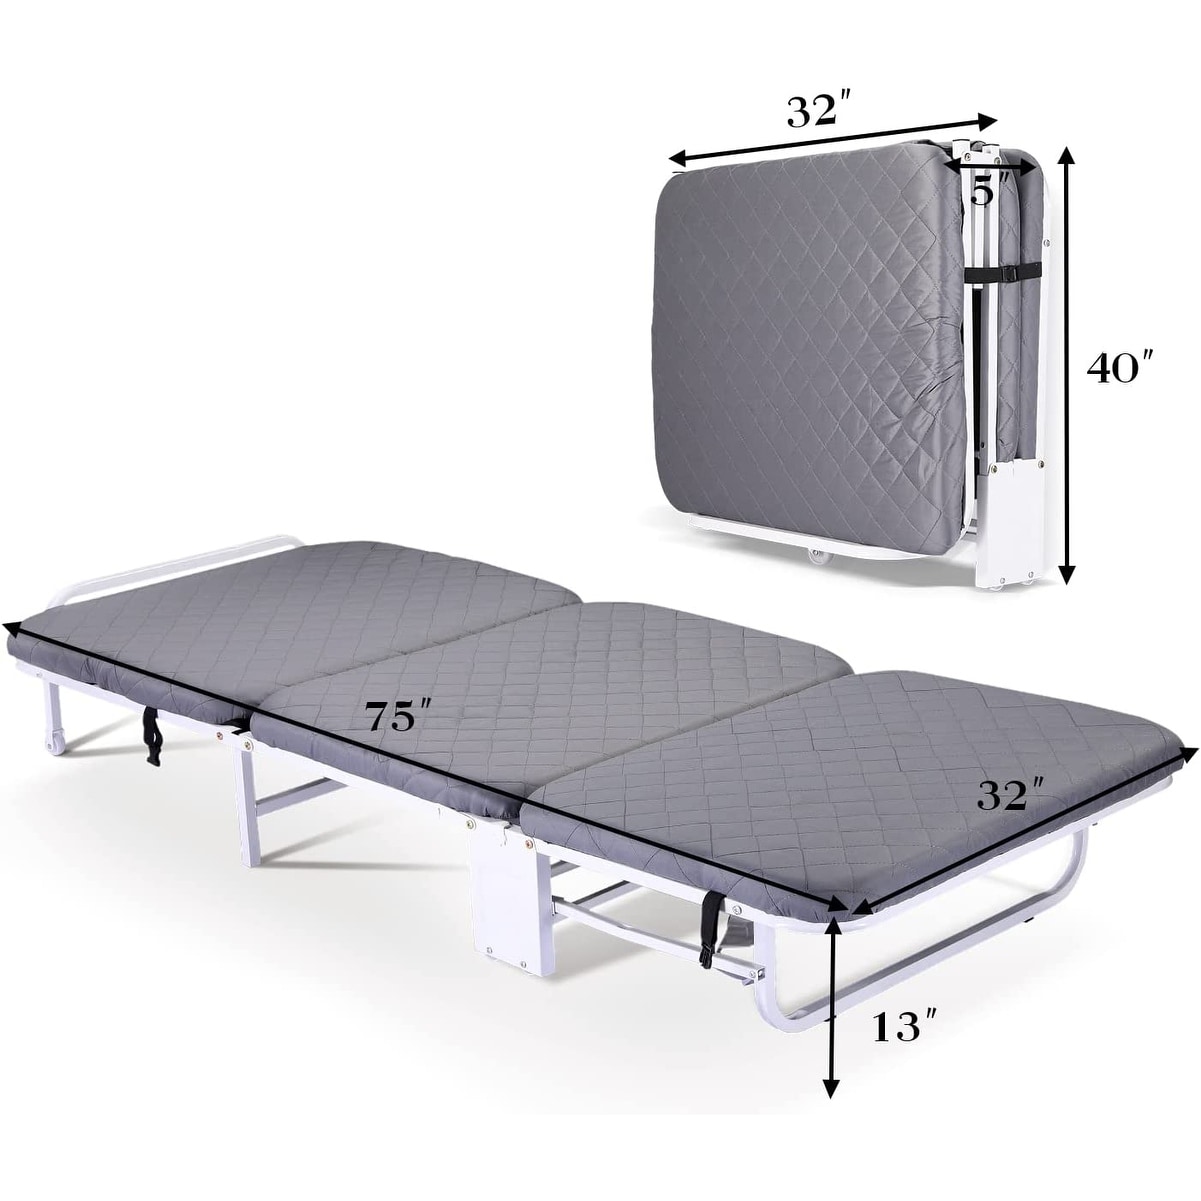 Folding Bed With 3.2 Mattress  Portable Foldable Guest Bed With Adjustable Backrest